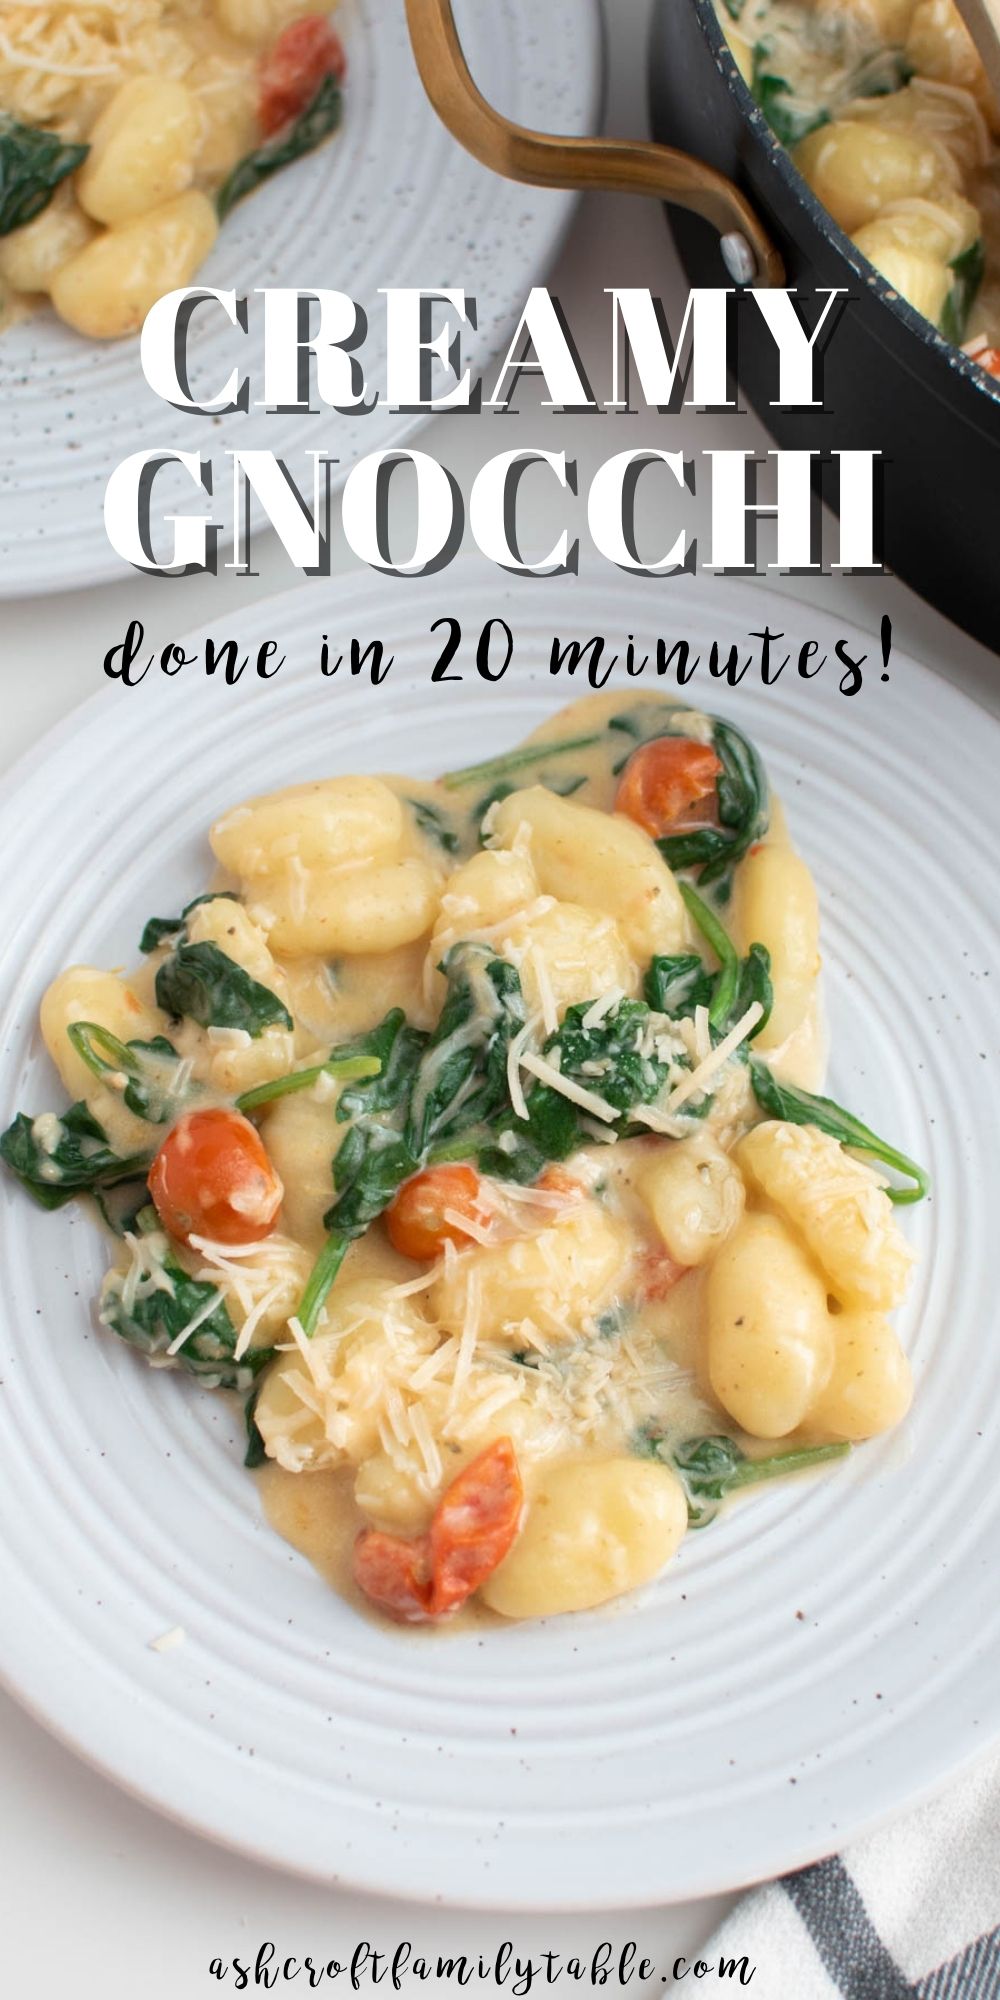 Pinterest graphic with text and plate of creamy gnocchi with tomatoes.